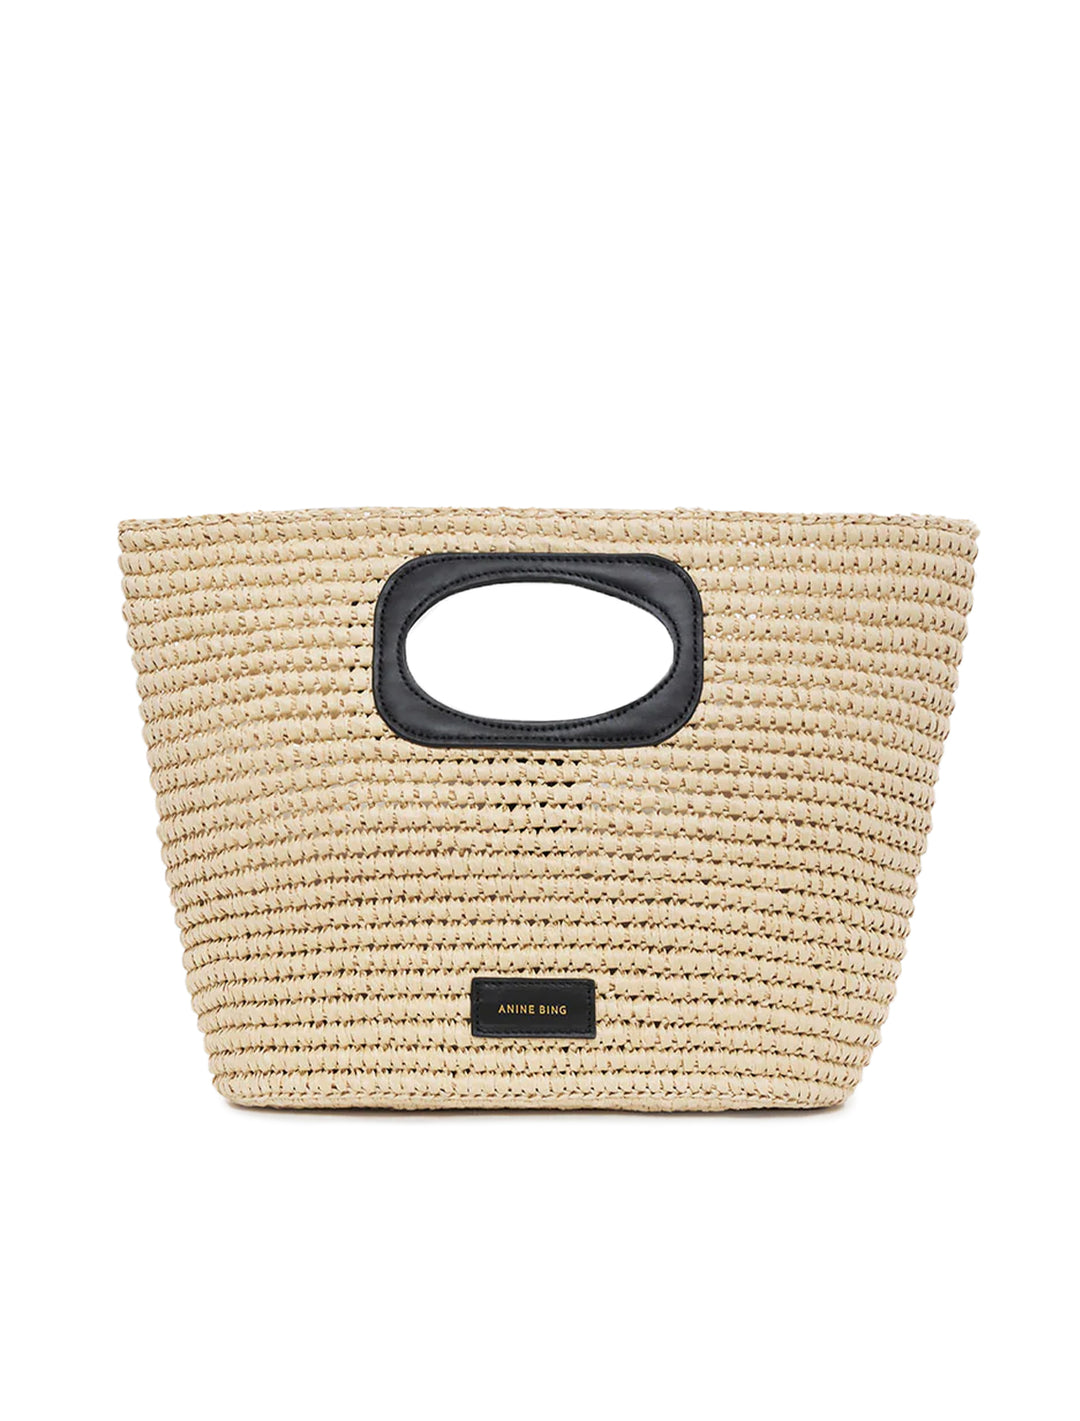 Front view of Anine Bing's mogeh tote in natural.